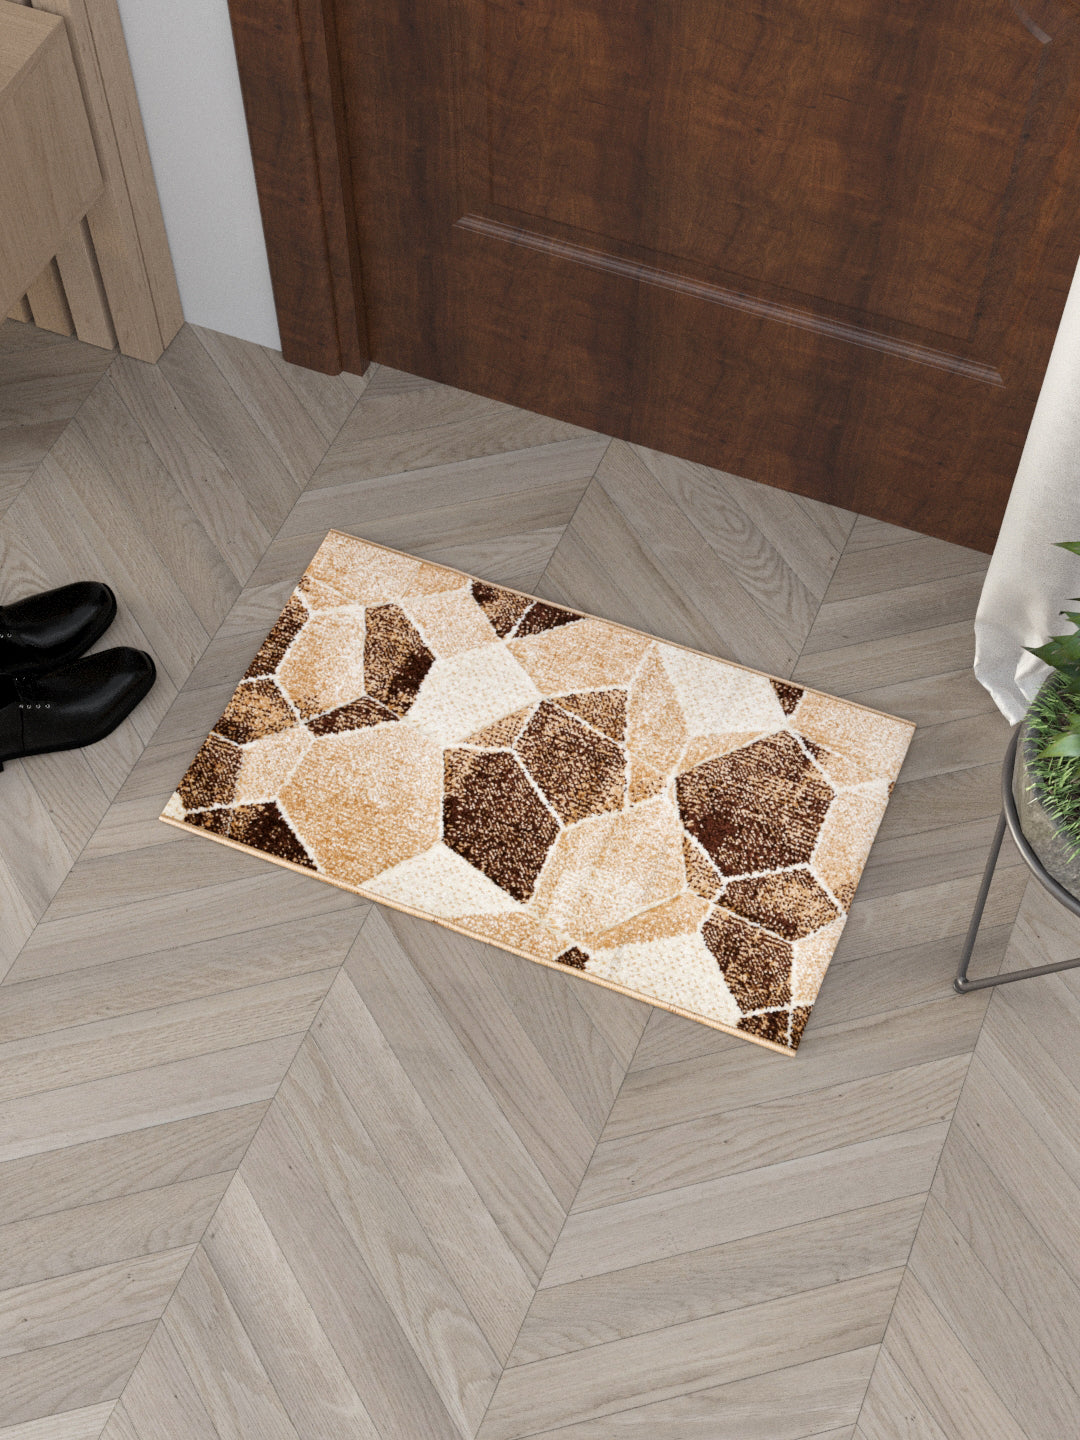 Doormat With Anti Skid Backing; 16x24 Inches; Beige Brown Diagonals